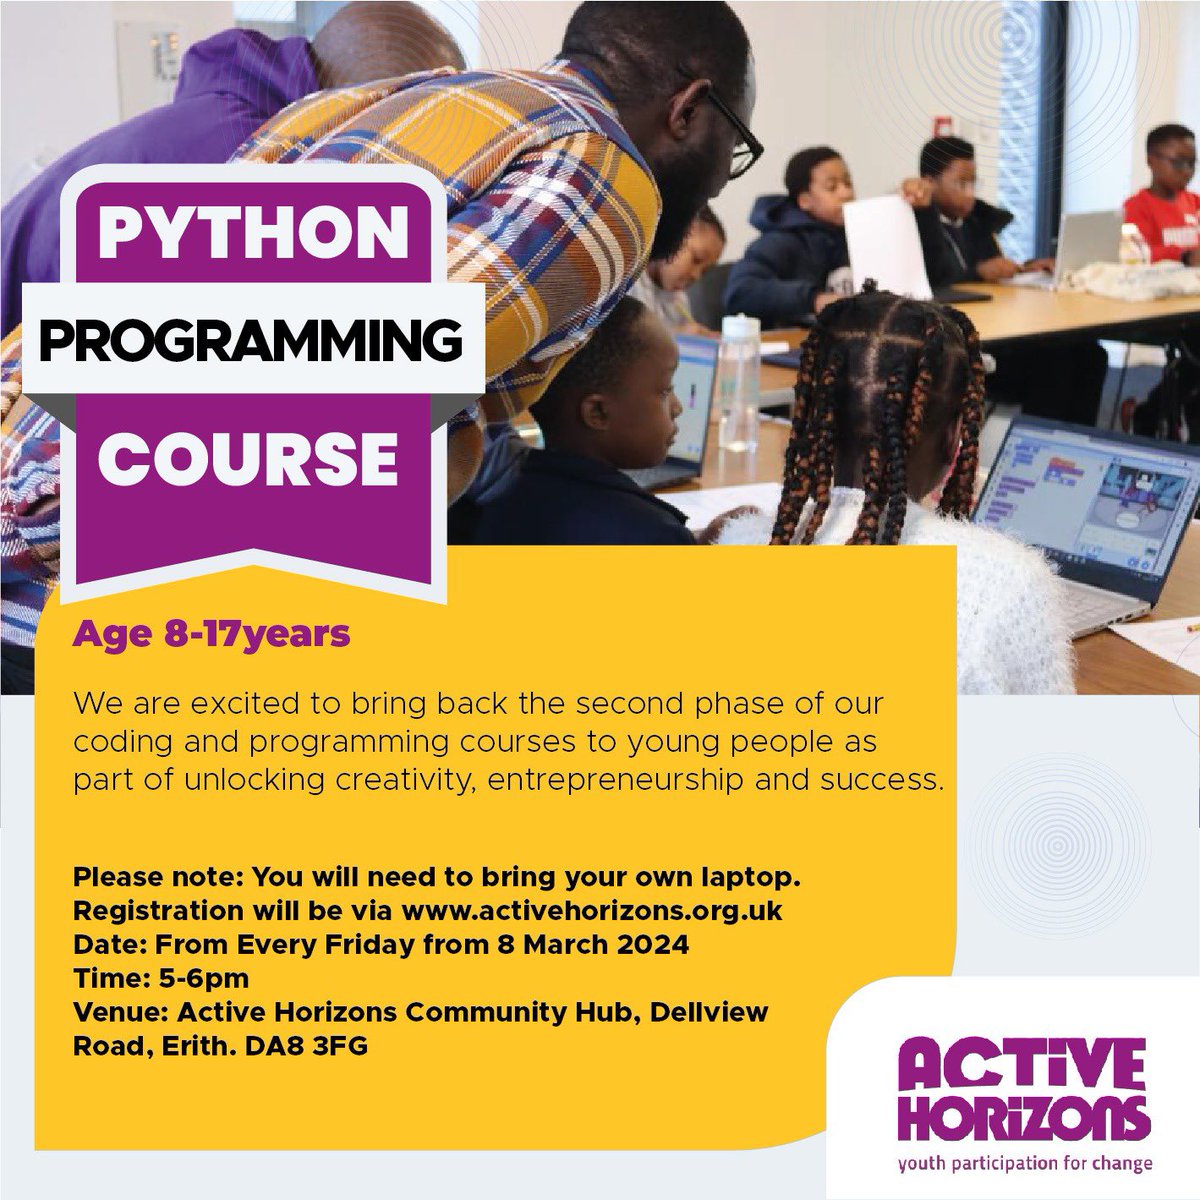 Registrations now open for the Python programming skills course for young people. We are excited to bring this next level of the coding program that we started offering last year. Places are limited. Visit website to register activehorizons.org/event/coding-p…